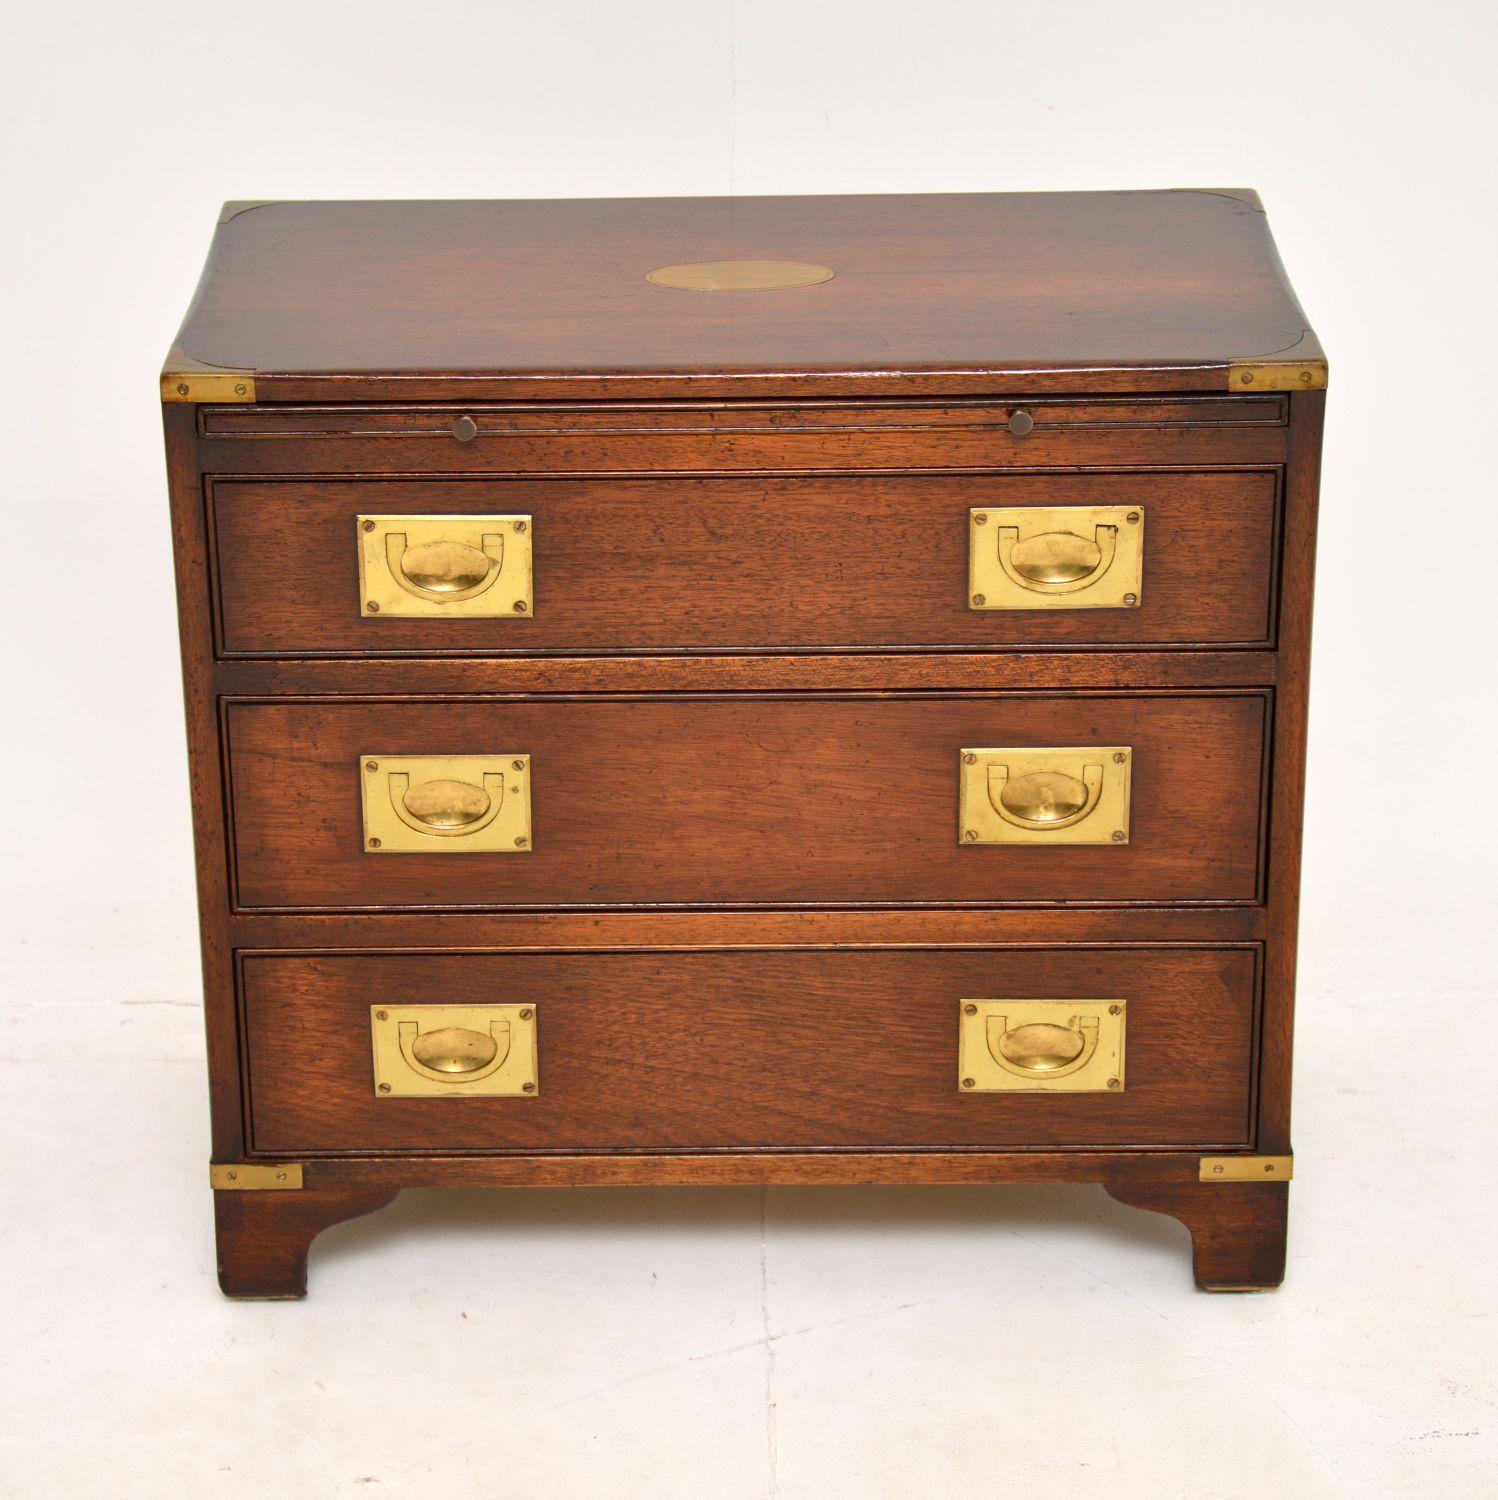 A beautiful antique military campaign chest of drawers in wood. This was made in England, it dates from around the 1950’s.
It is of amazing quality and is a very useful size. It is small and sturdy, with lots of storage space. Due to the height it